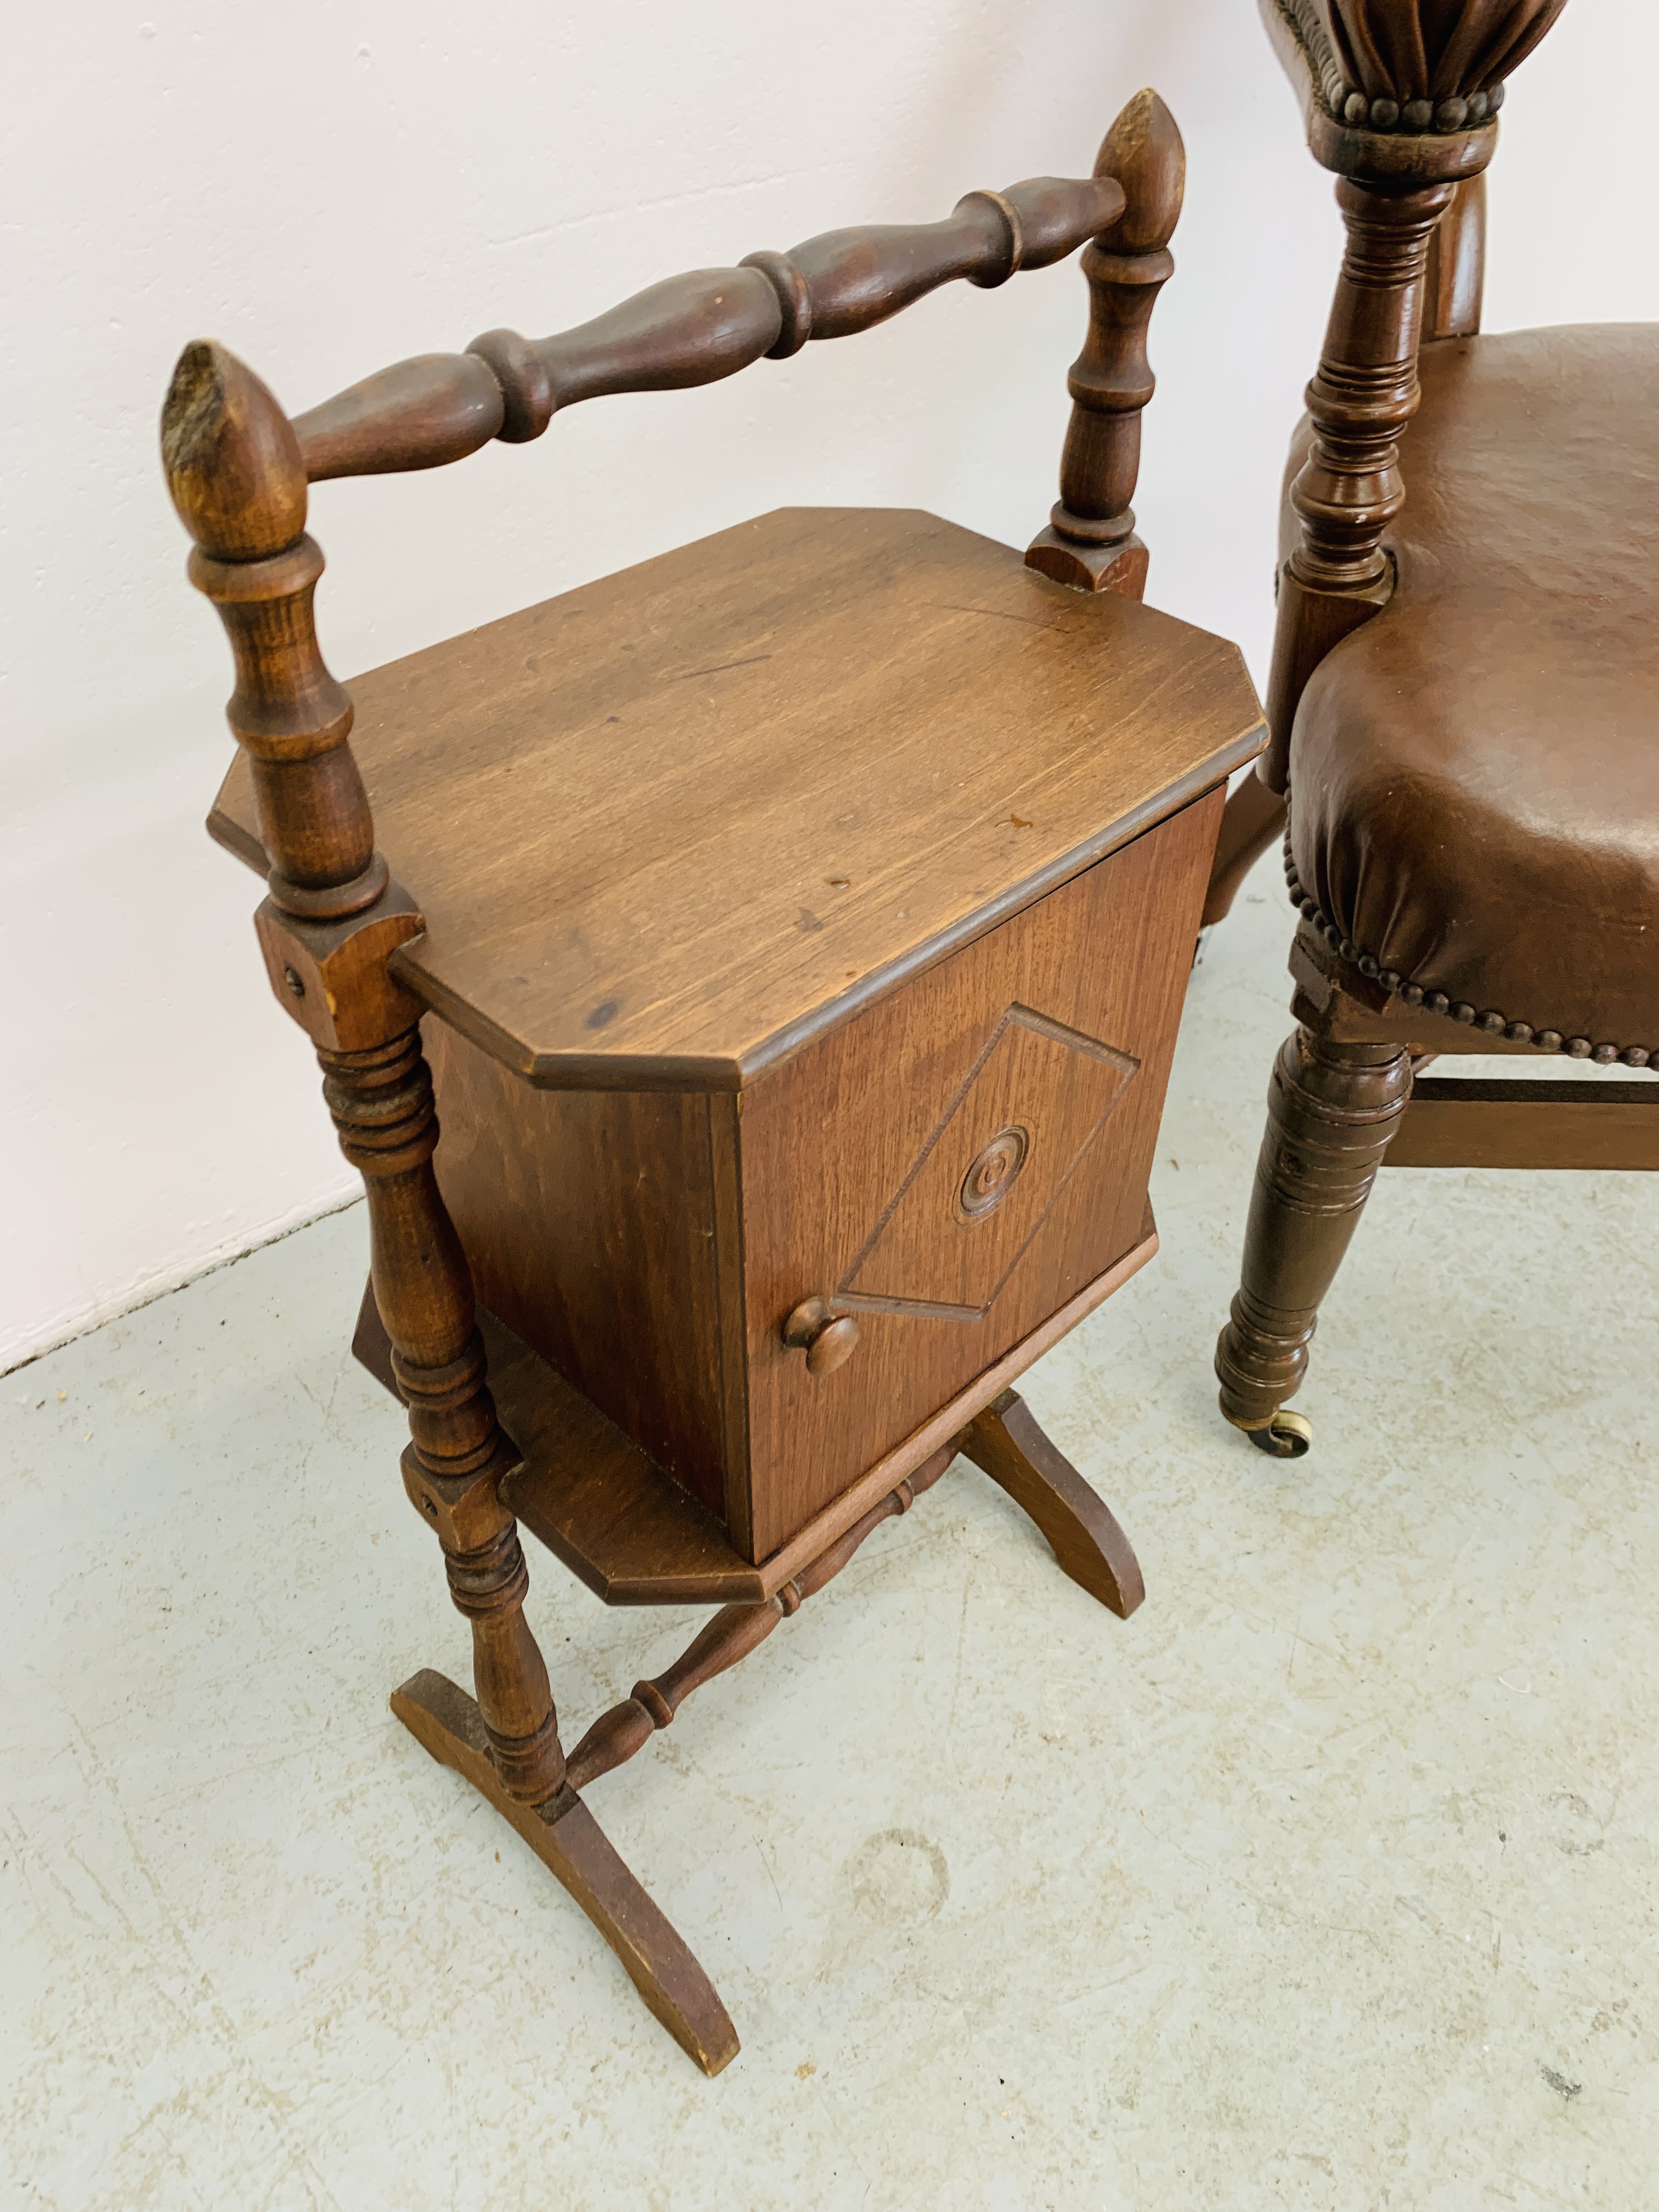 A REPRODUCTION BROWN LEATHER OFFICE CHAIR WITH STUDD DETAIL ALONG WITH A SMALL SINGLE DOOR TURNED - Image 8 of 8